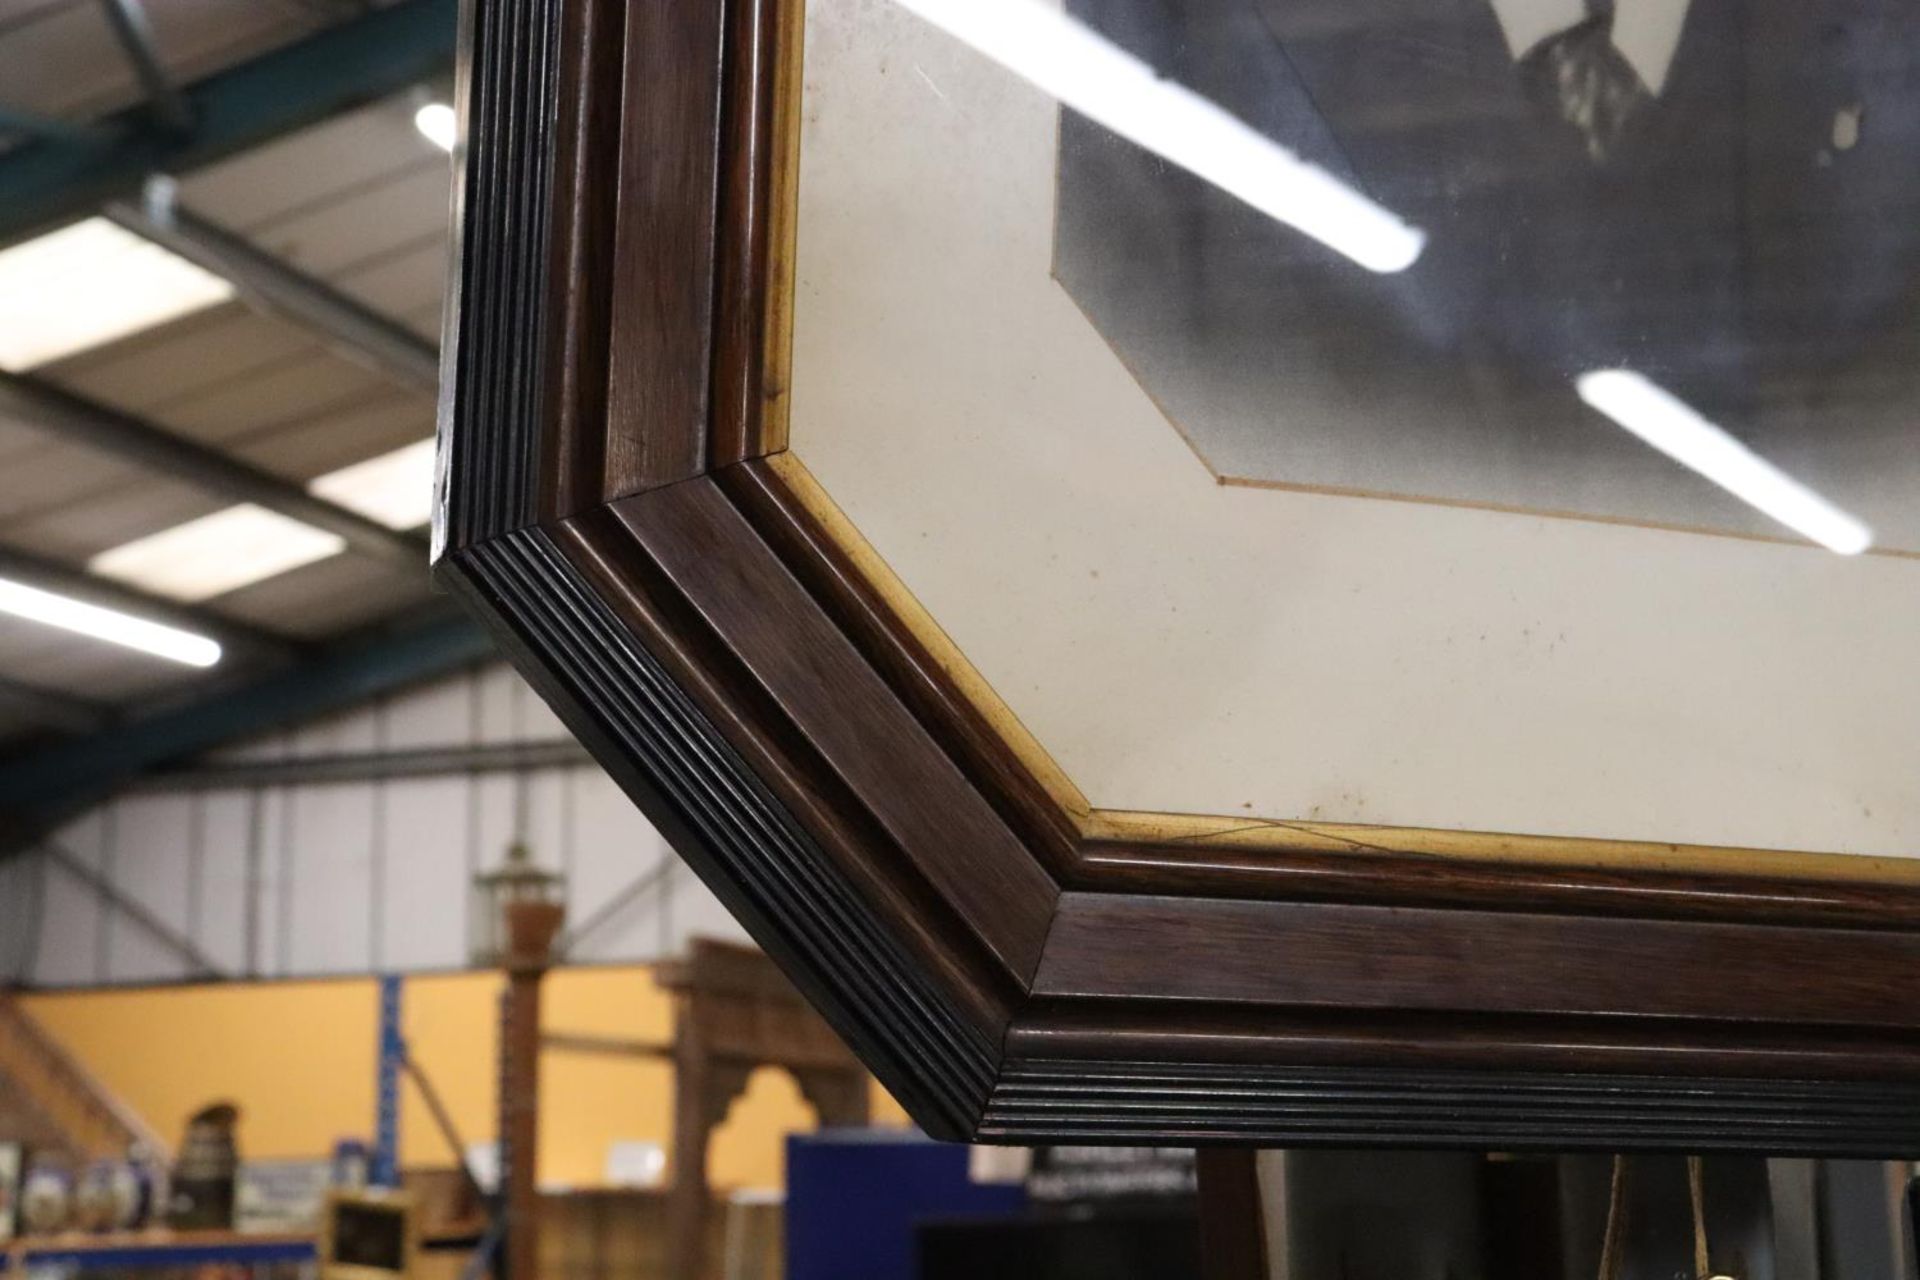 A VINTAGE PHOTOGRAPHIC PRINT OF A MAN, IN A MAHOGANY OCTAGONAL FRAME - Image 3 of 4